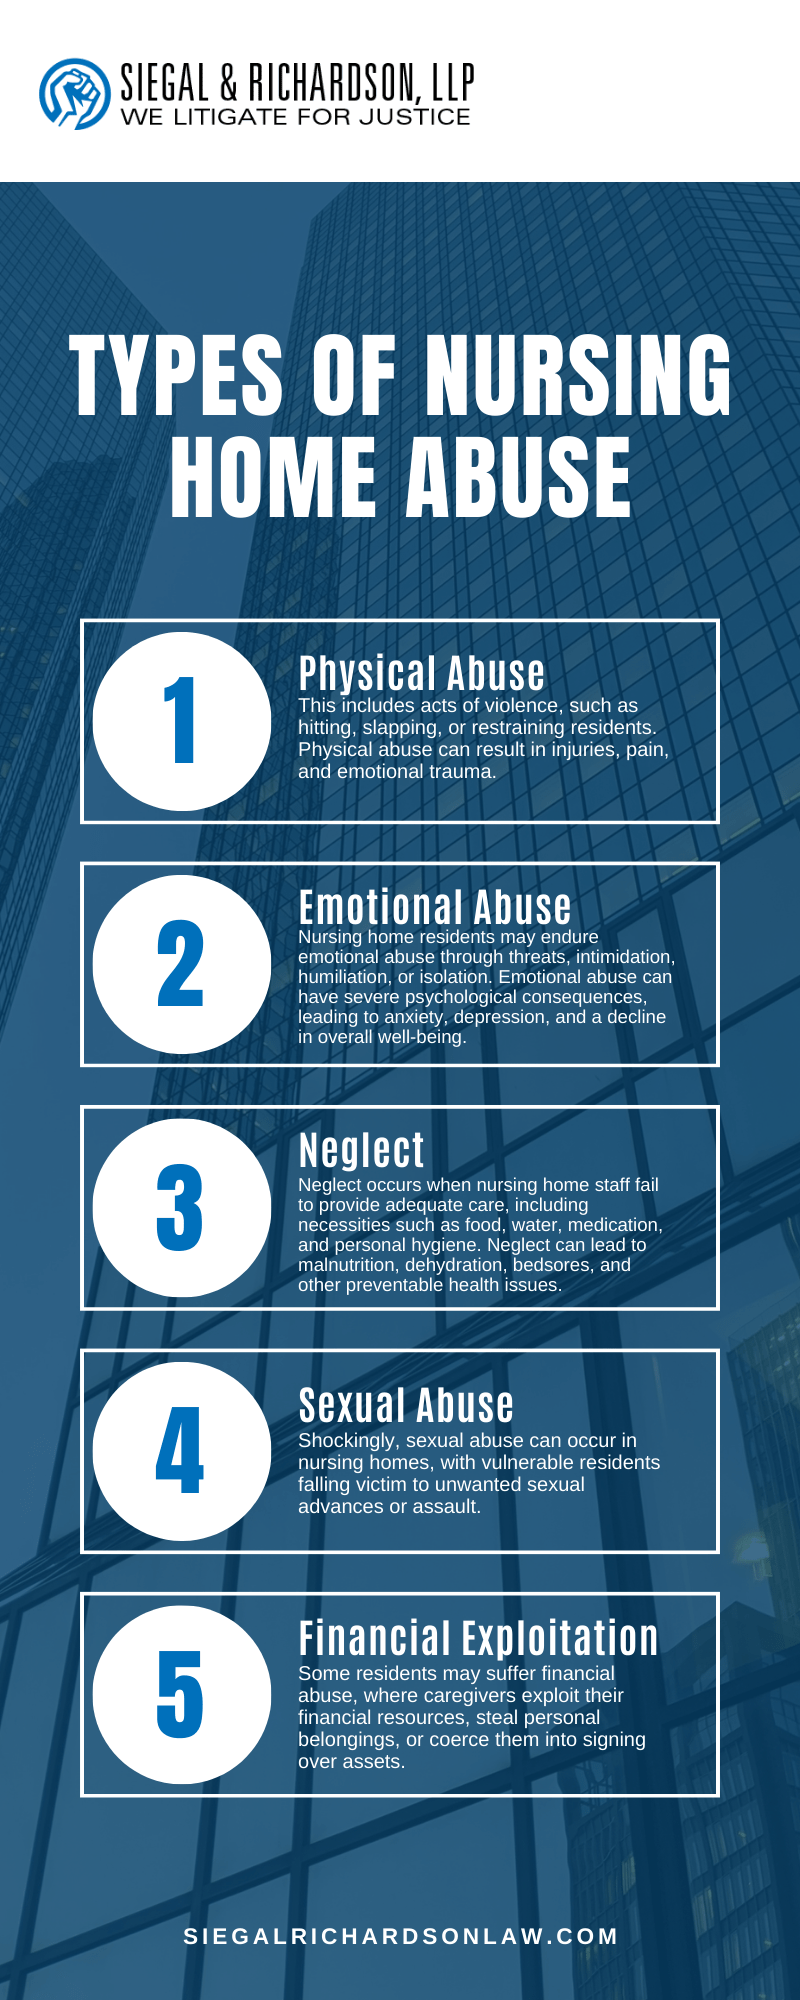 Types of Nursing Home Abuse Infographic